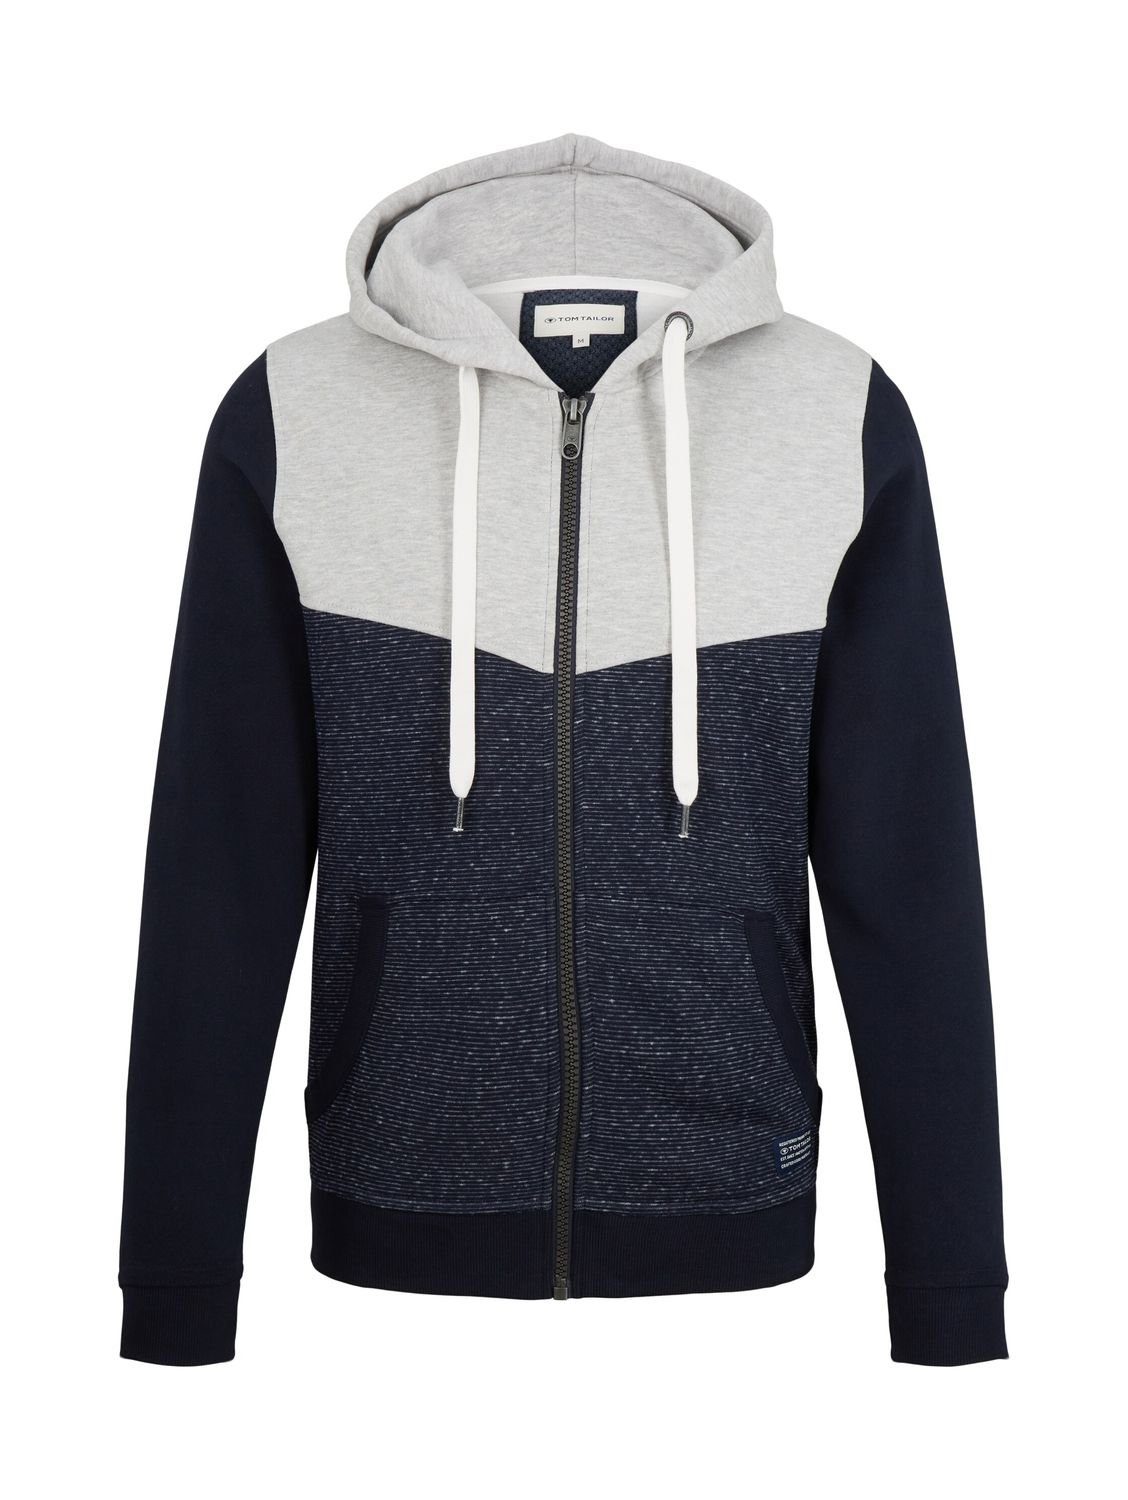 TOM TAILOR Hoodie COLORBLOCK aus Baumwollmix navy offwhite inject stripe